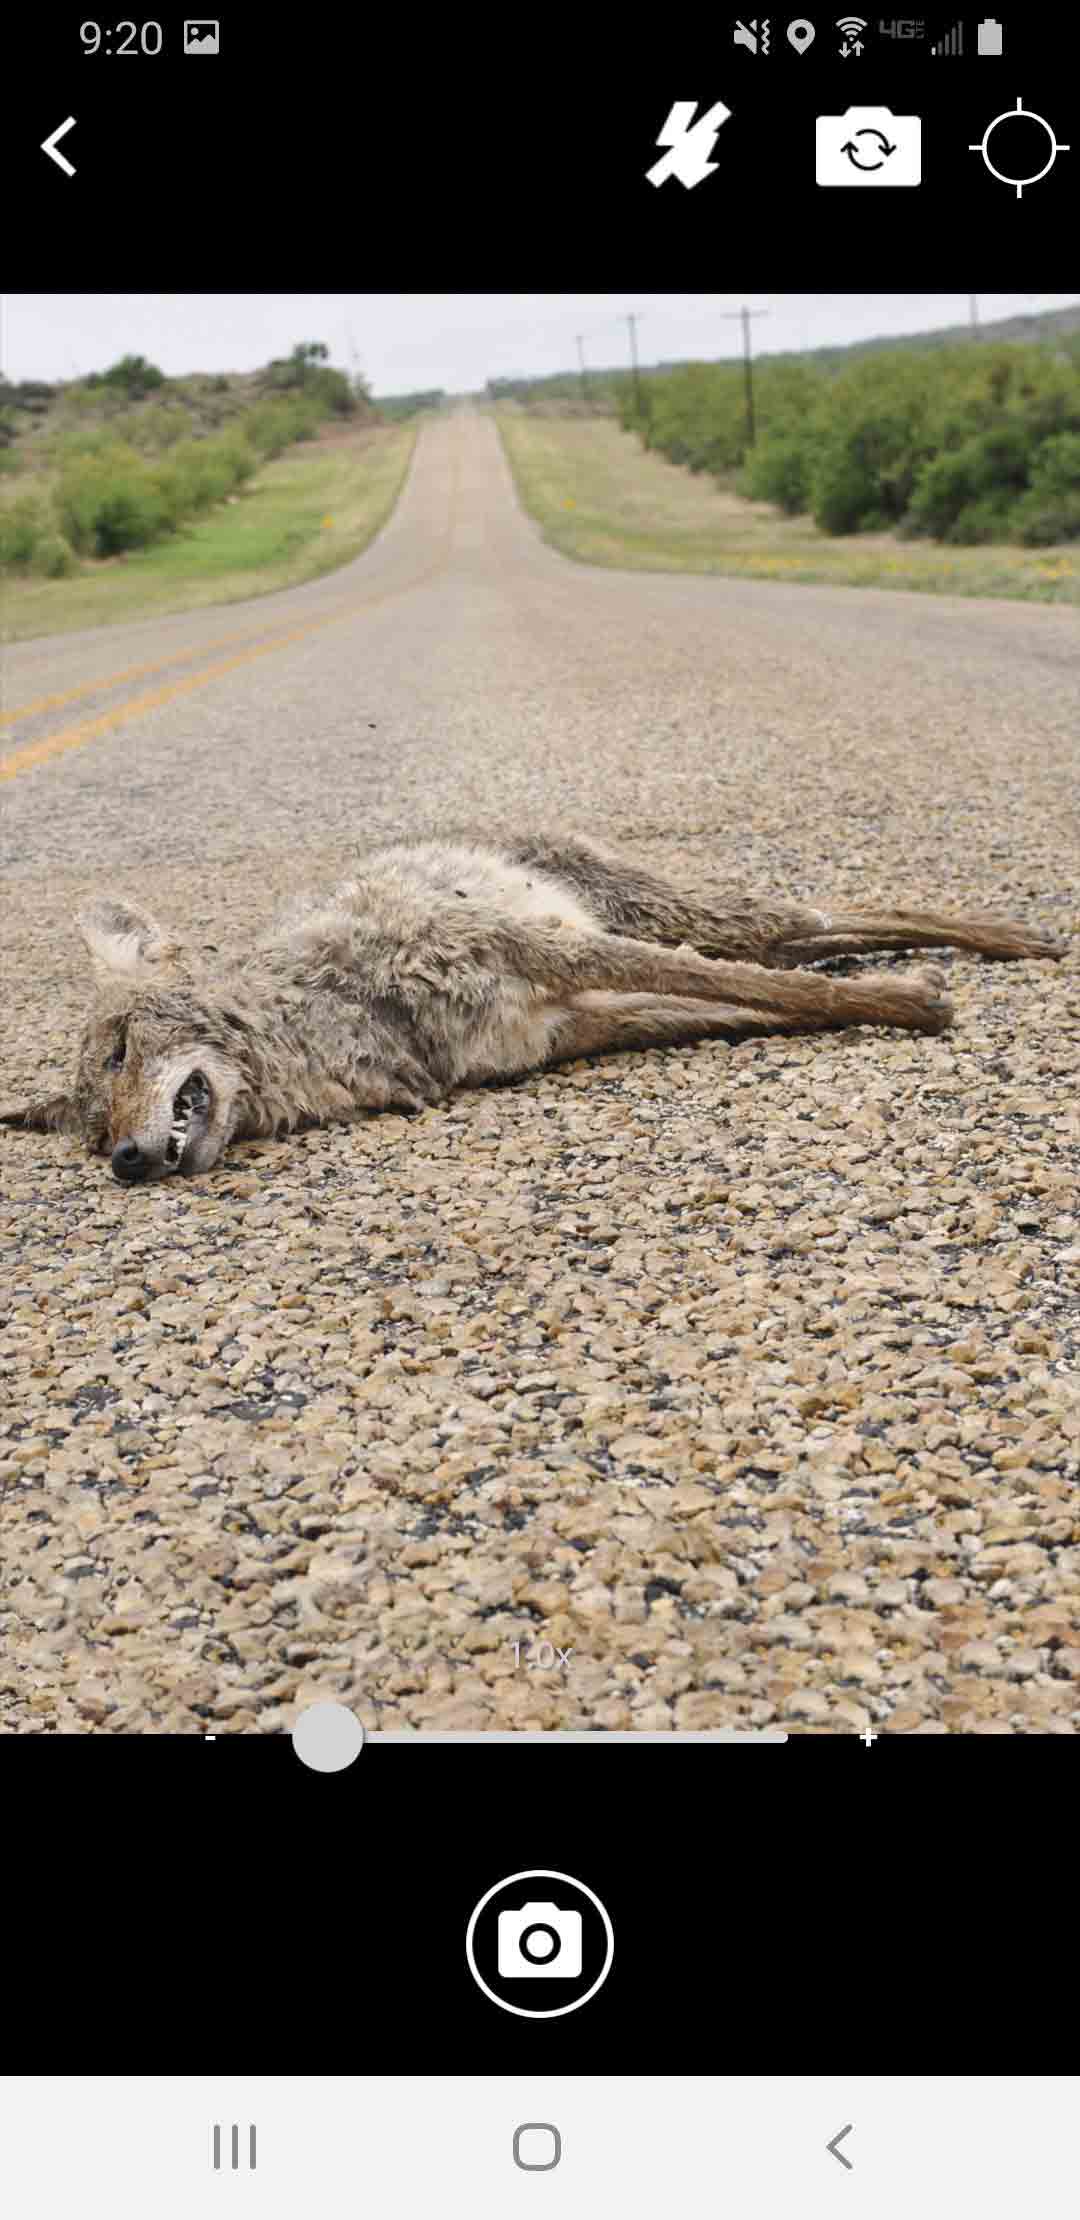 A dead coyote lying in the road.